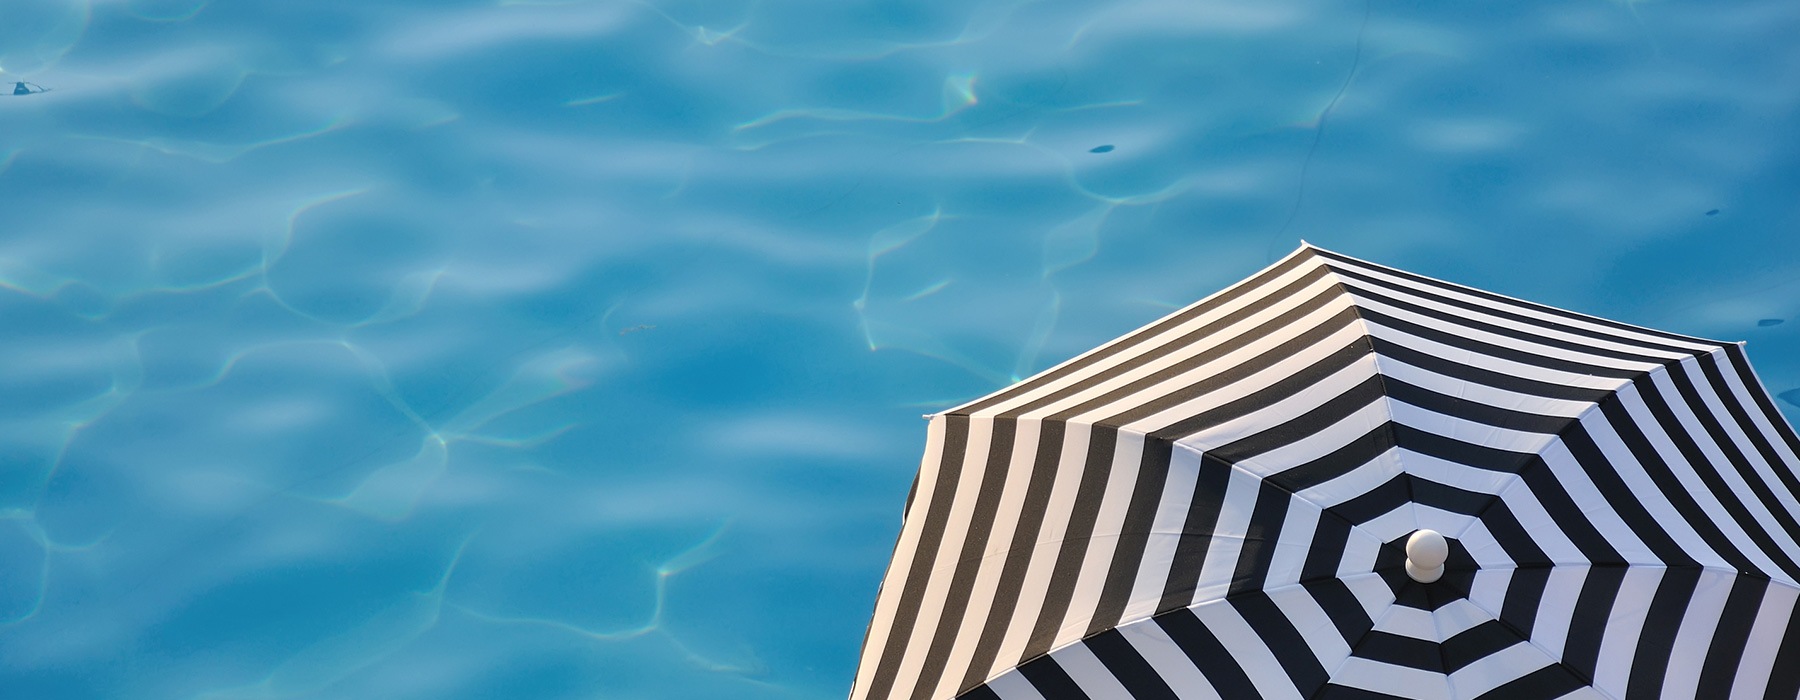 lifestyle image of an umbrella beside a sparkling swimming pool